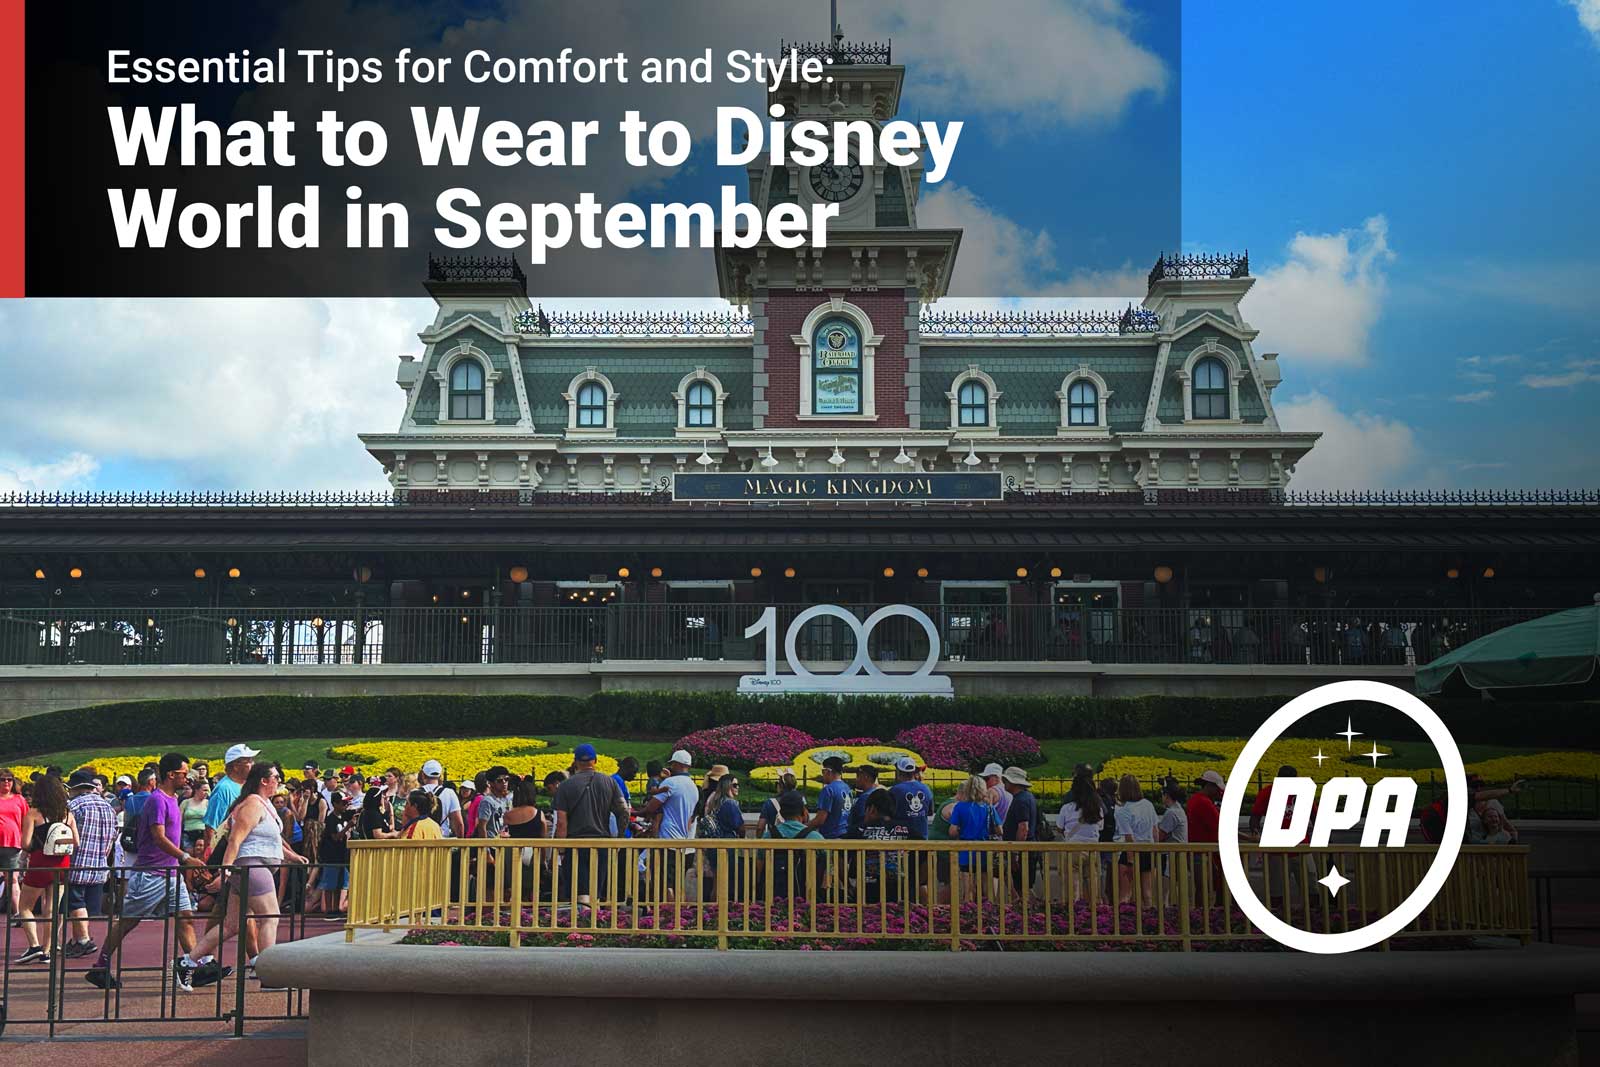 What to Wear to Disney World in September